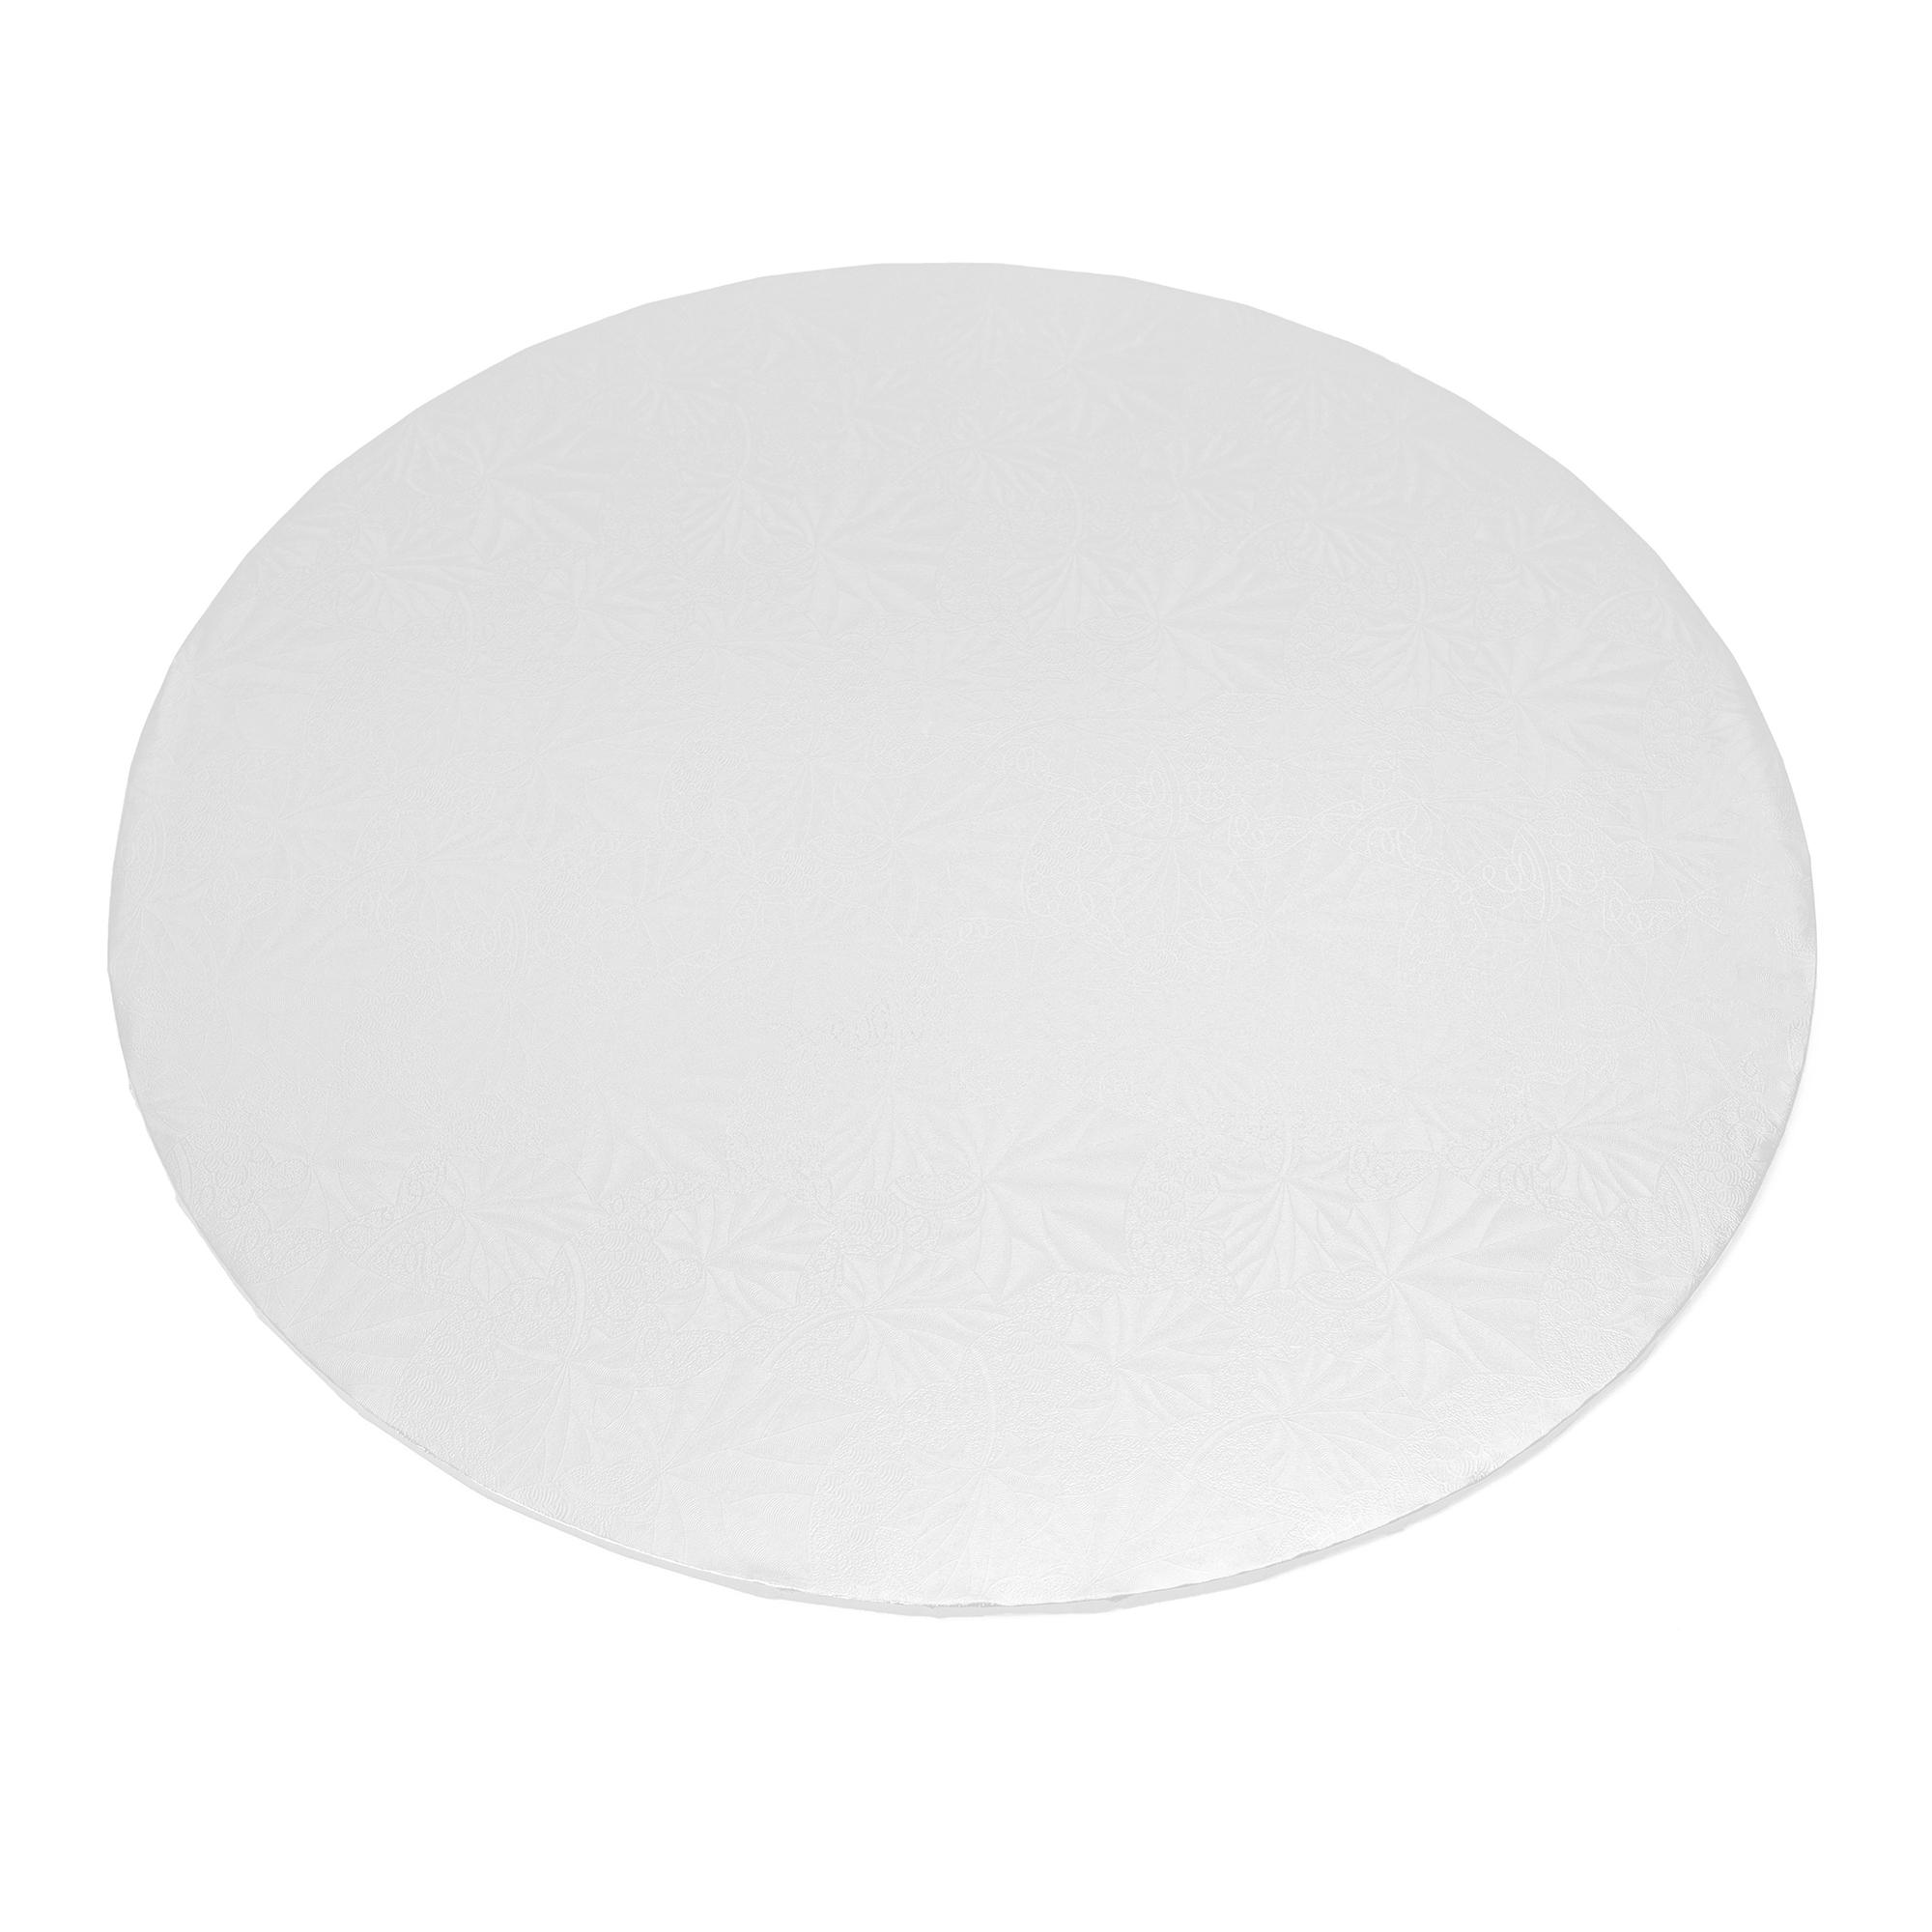 Foil Covered Cake Board 16" 5pc/pack - White